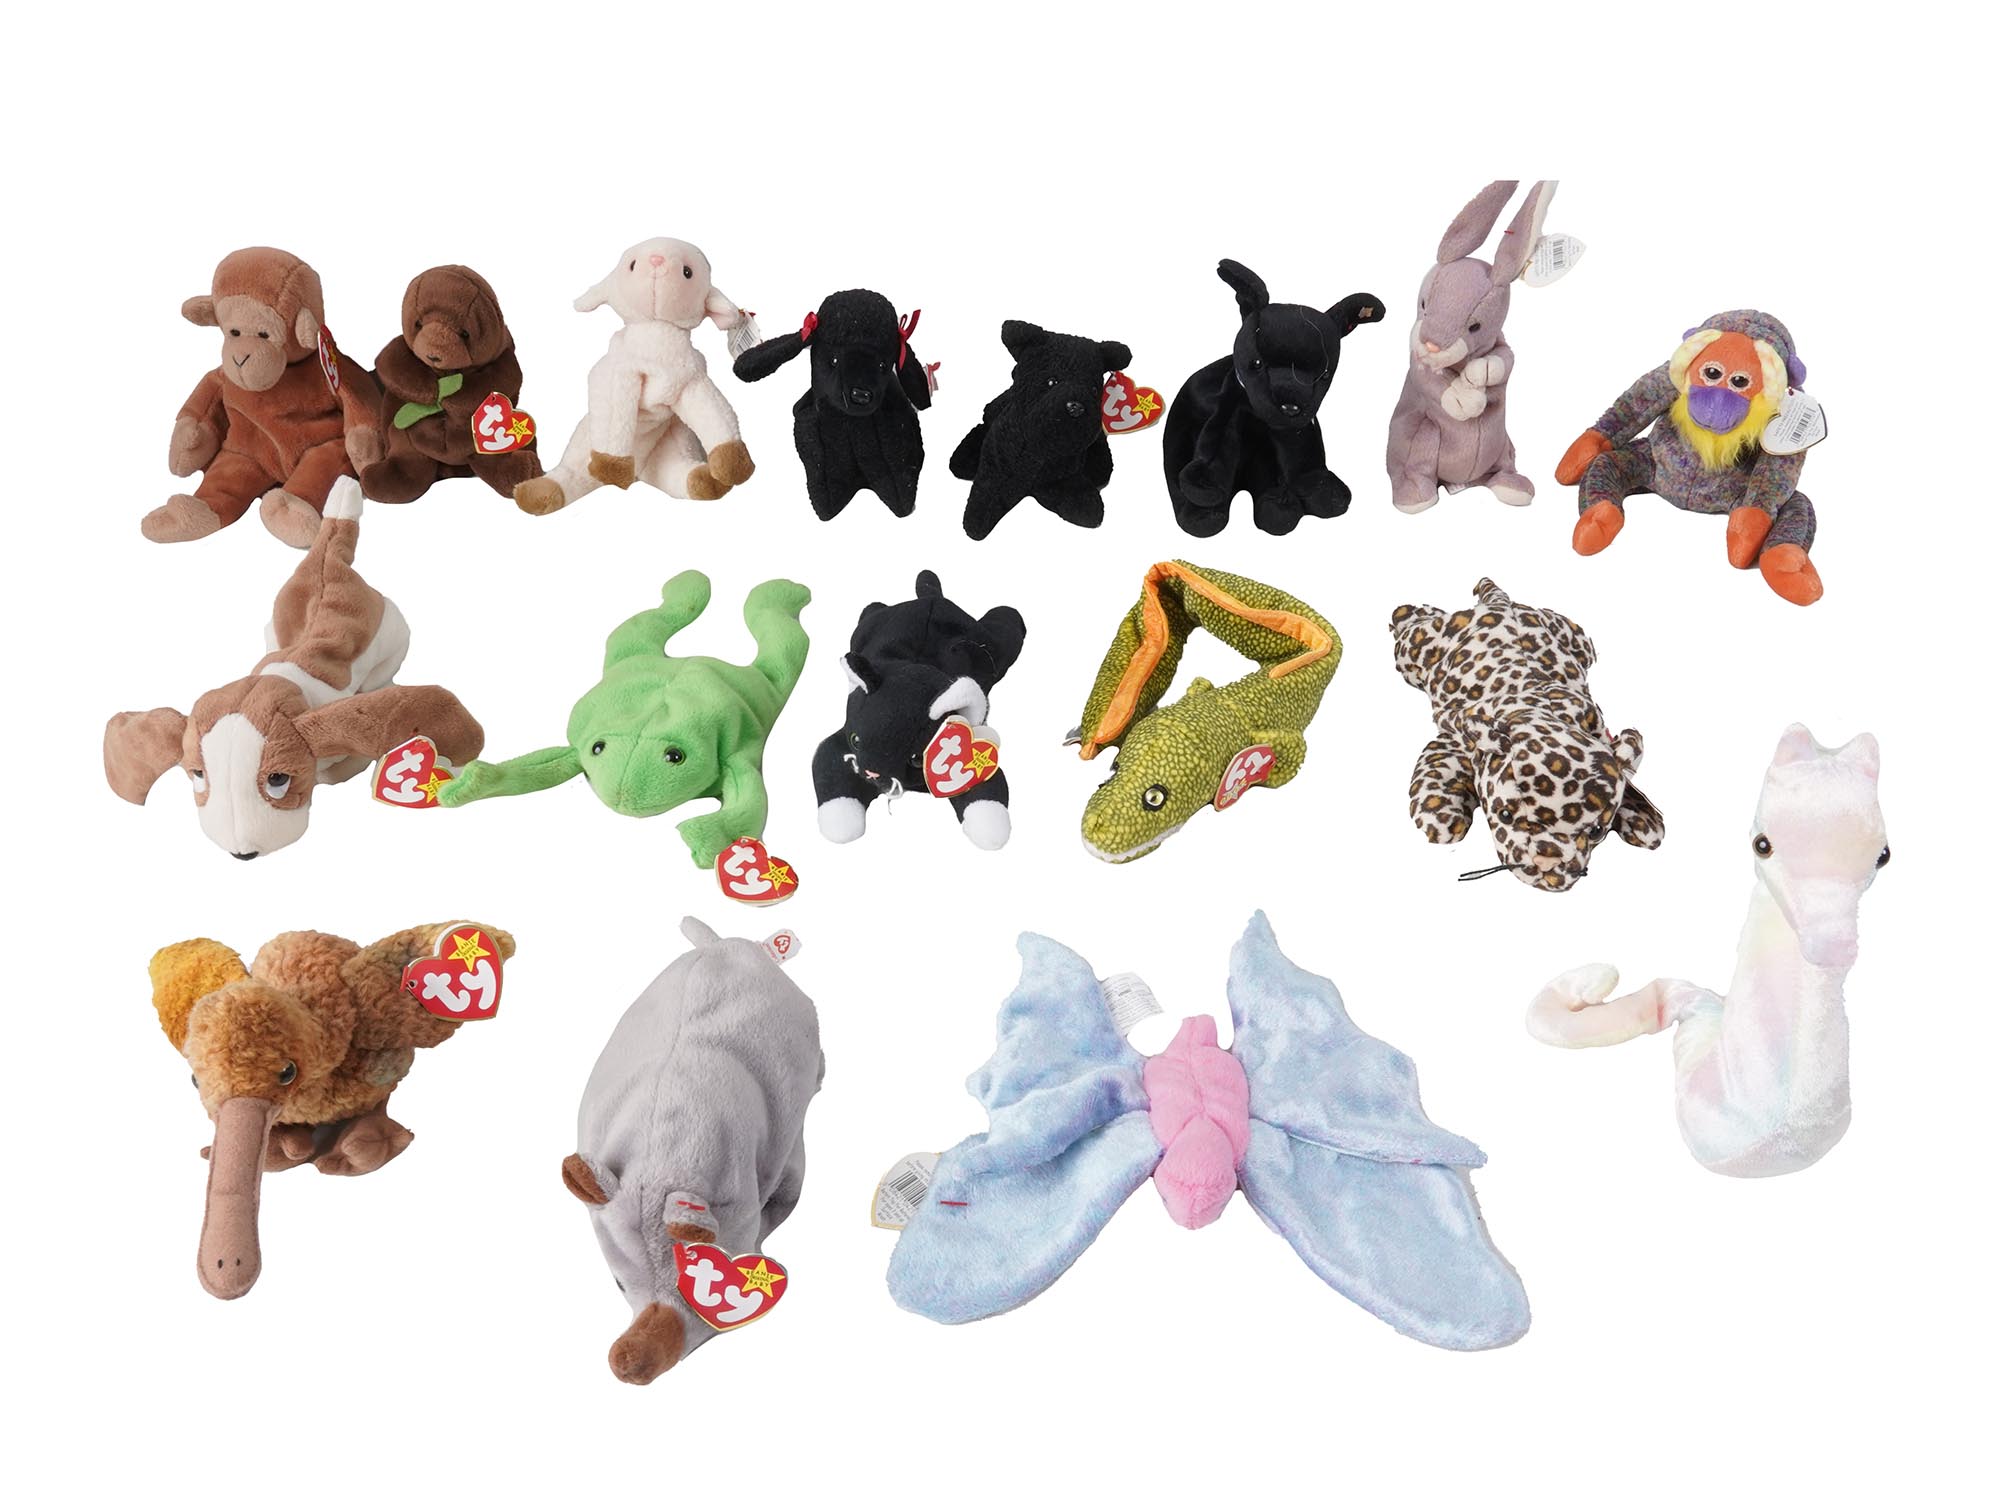 VINTAGE 1990S BEANIE BABY ANIMAL TOYS COLLECTION PIC-3